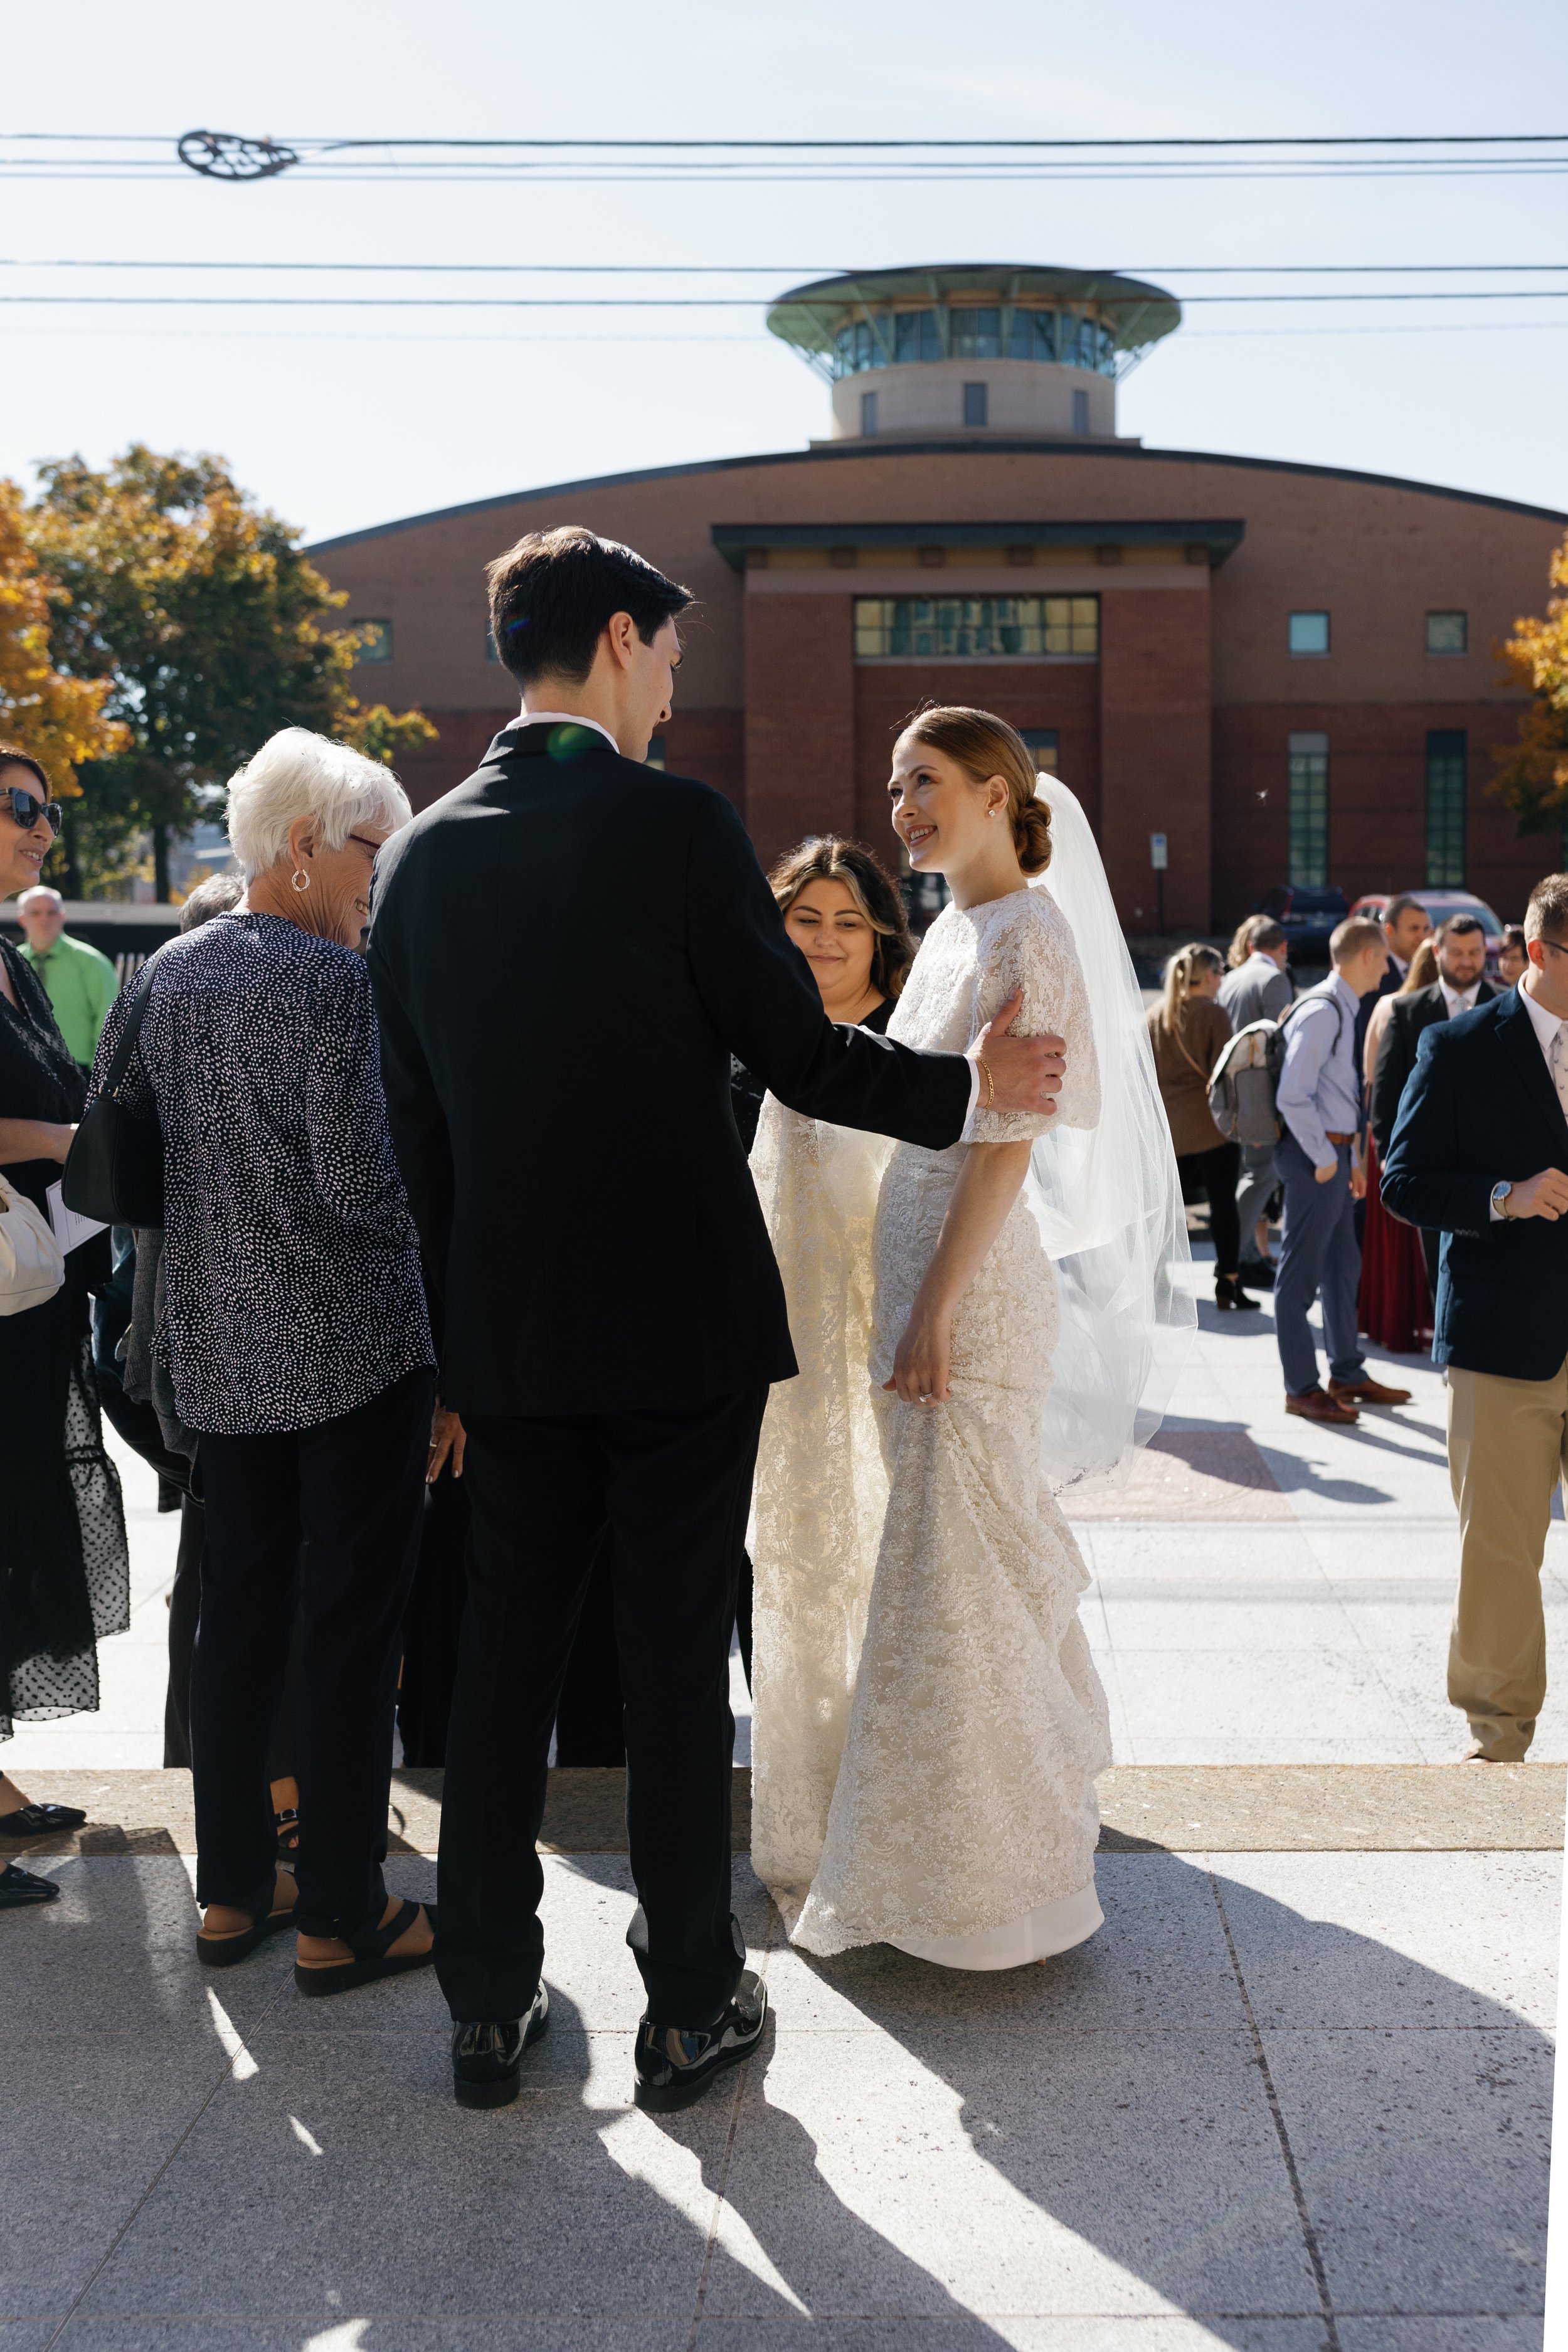 Romantic Wedding in Downtown Ohio Youngstown